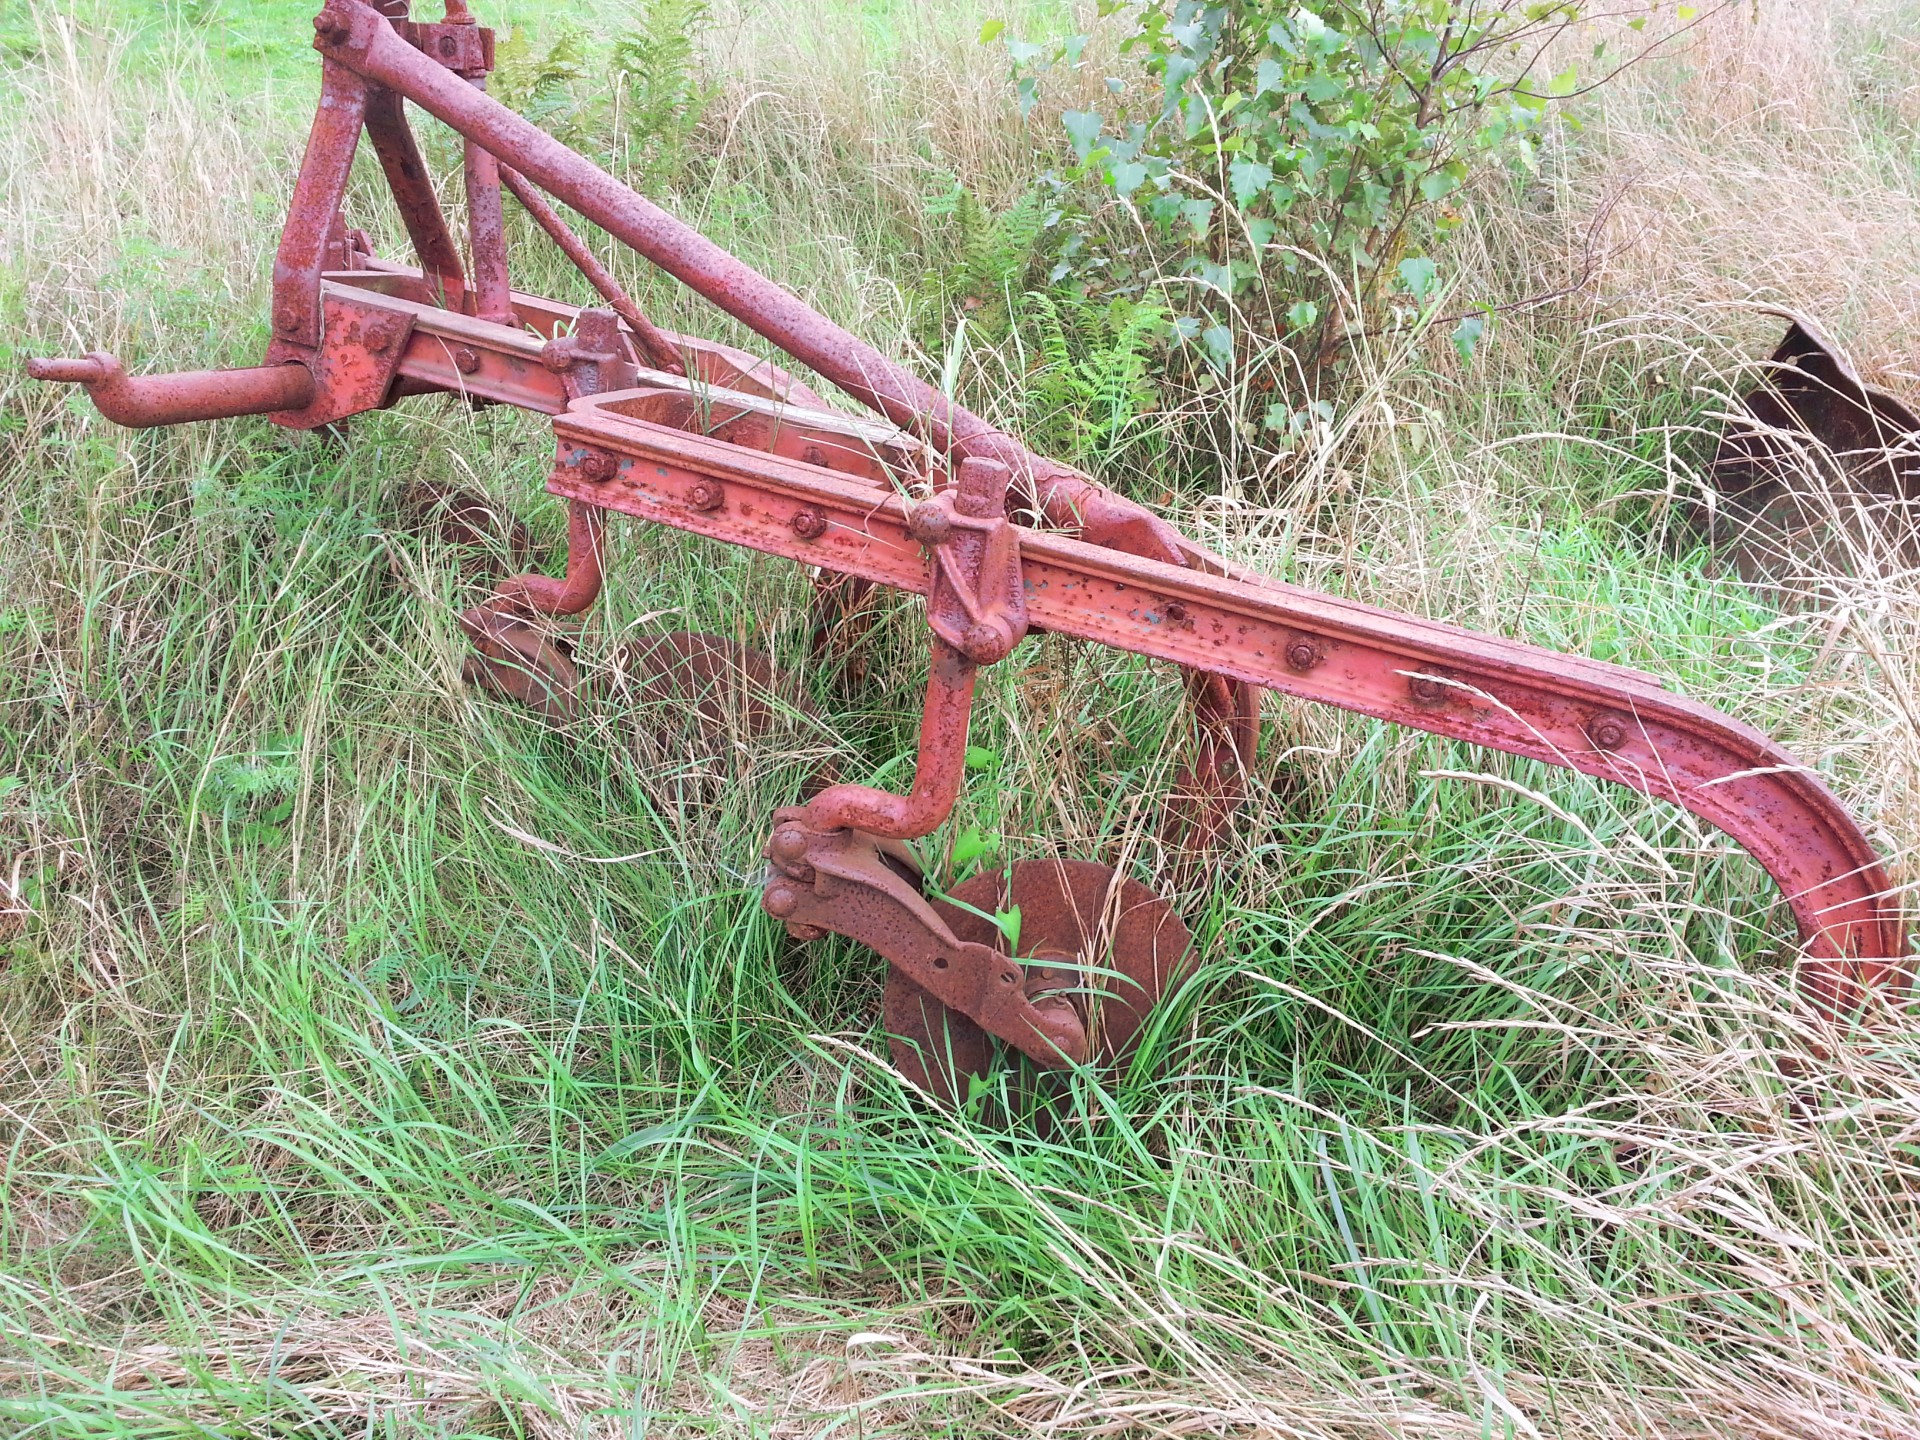 View of old rusty farm machinery